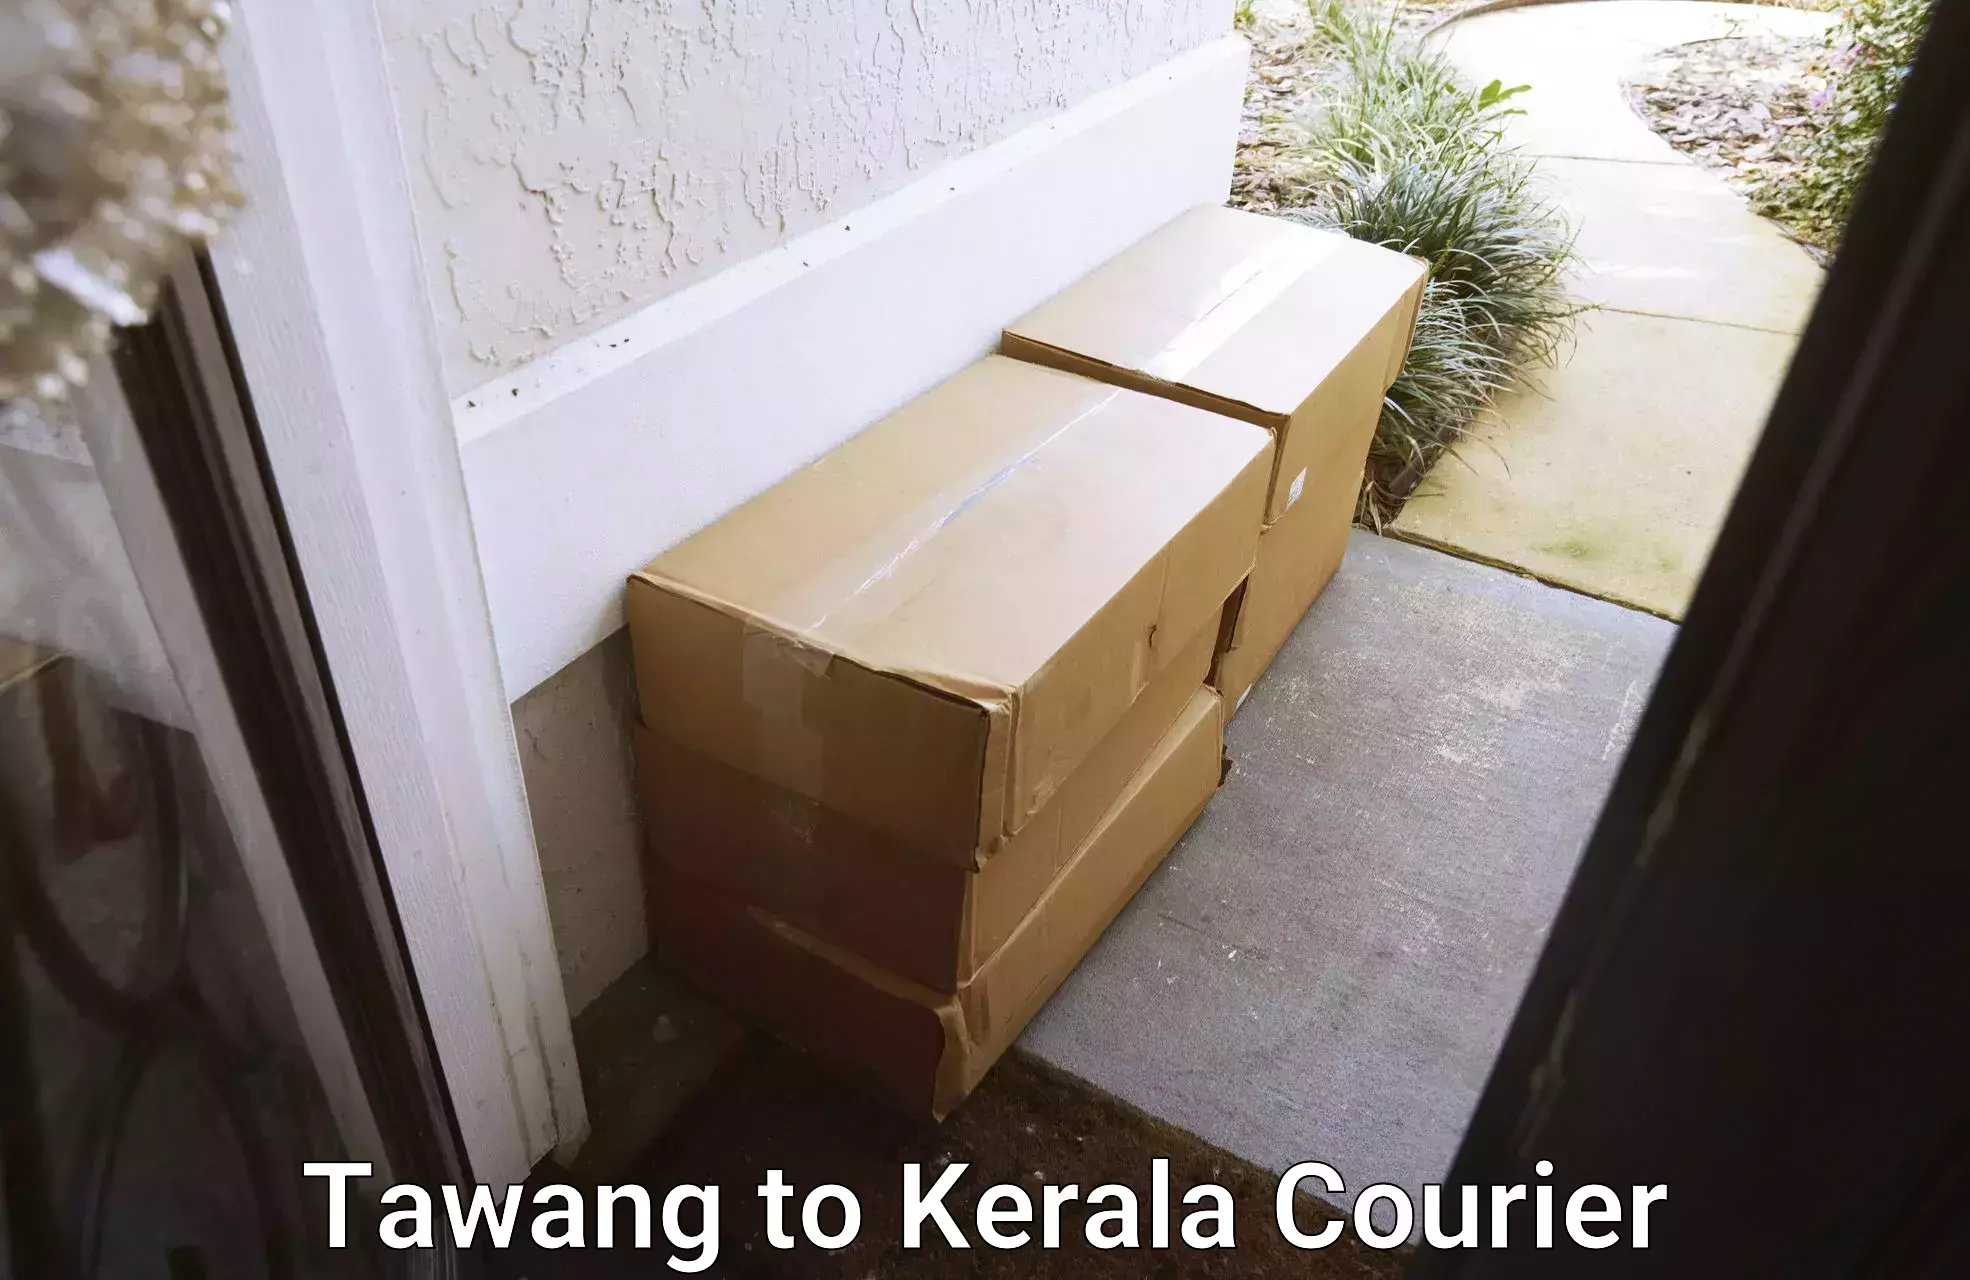 Courier service comparison Tawang to Rajamudy